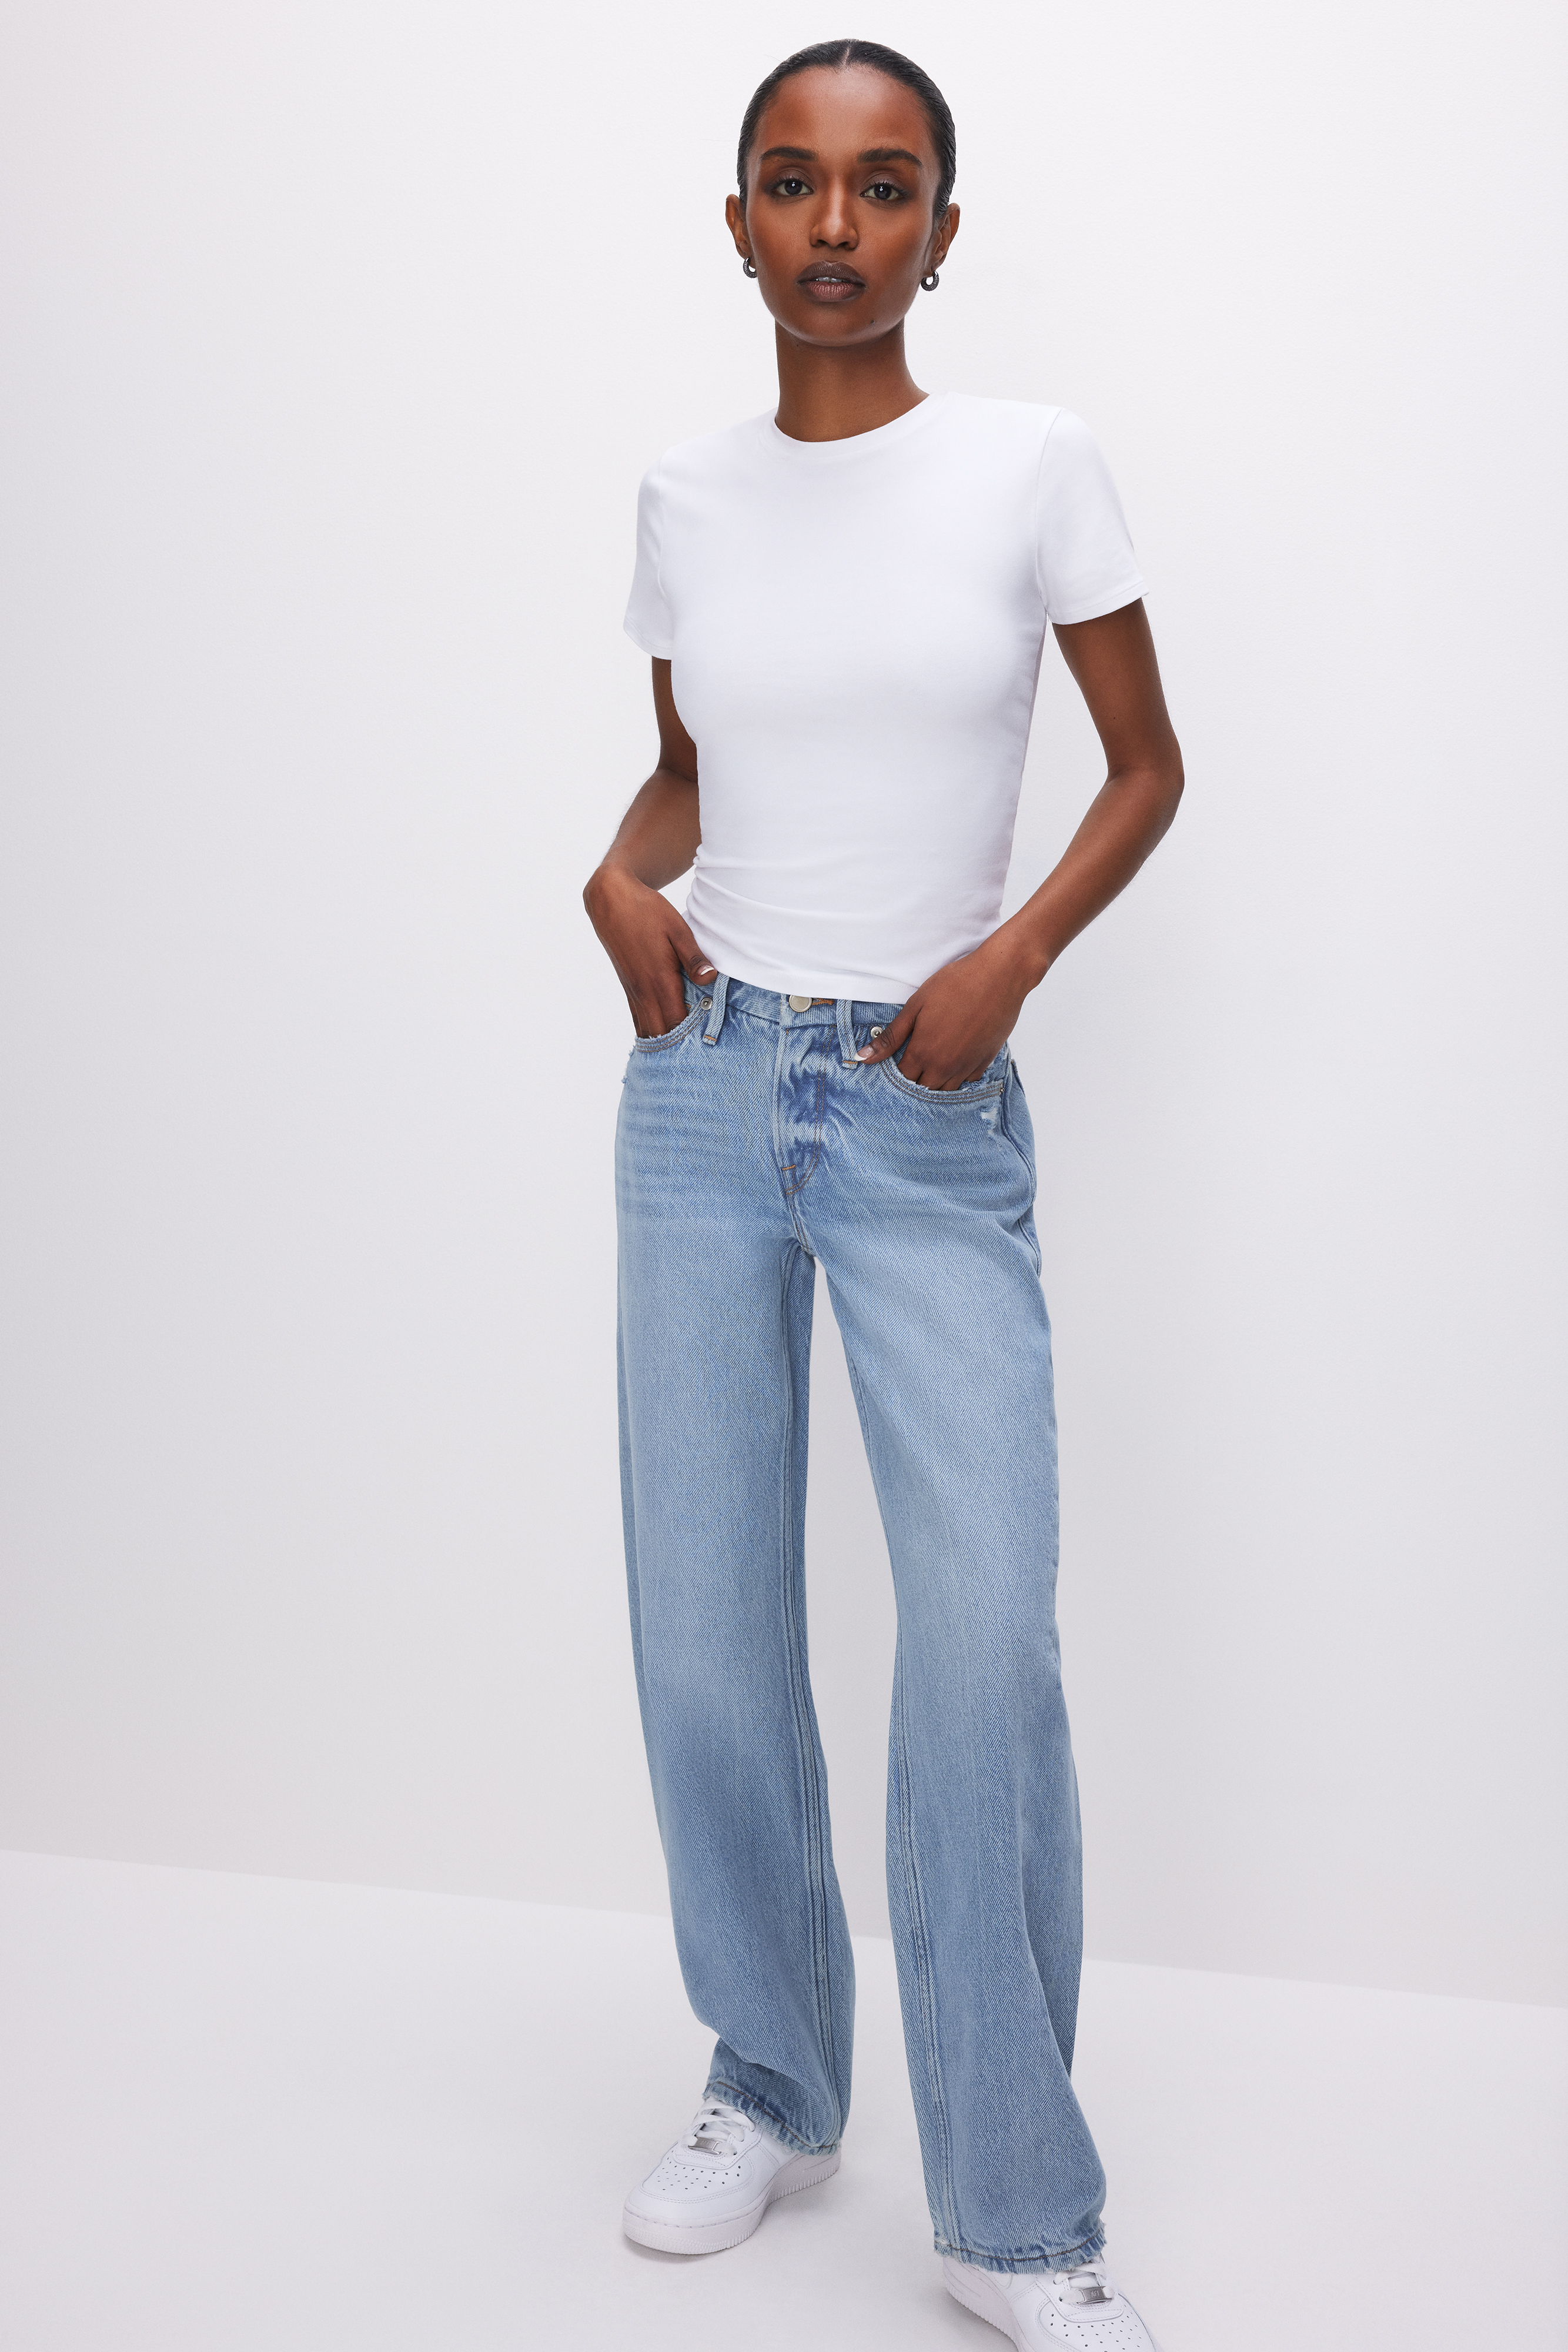 Styled with GOOD PETITE '90s JEANS | INDIGO466